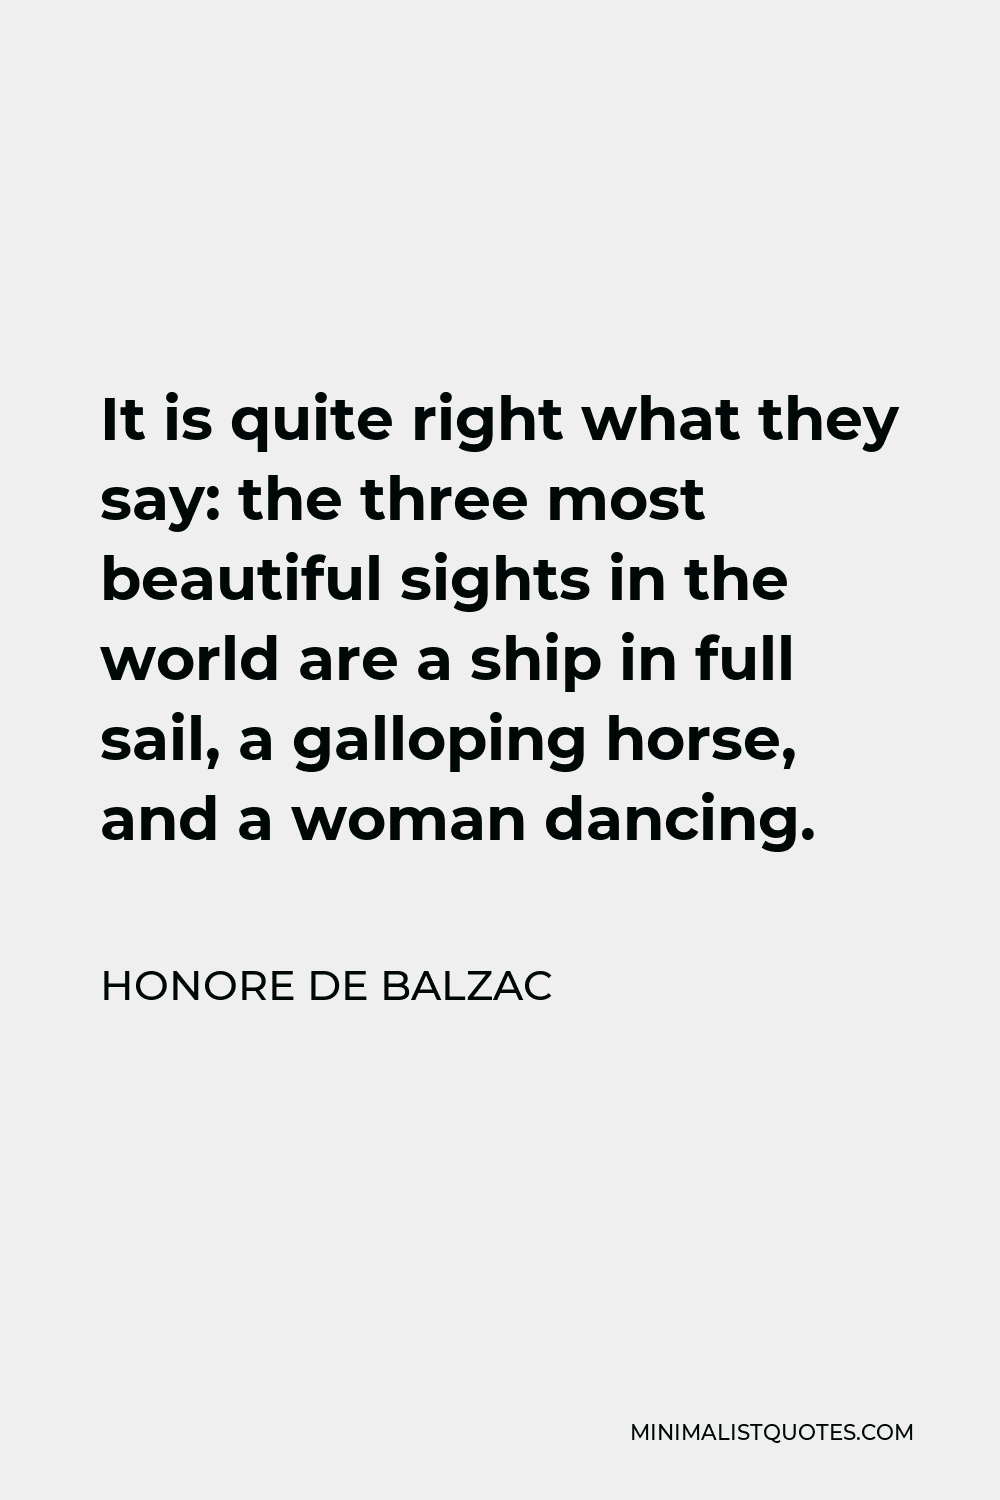 Honore de Balzac Quote - It is quite right what they say: the three most beautiful sights in the world are a ship in full sail, a galloping horse, and a woman dancing.